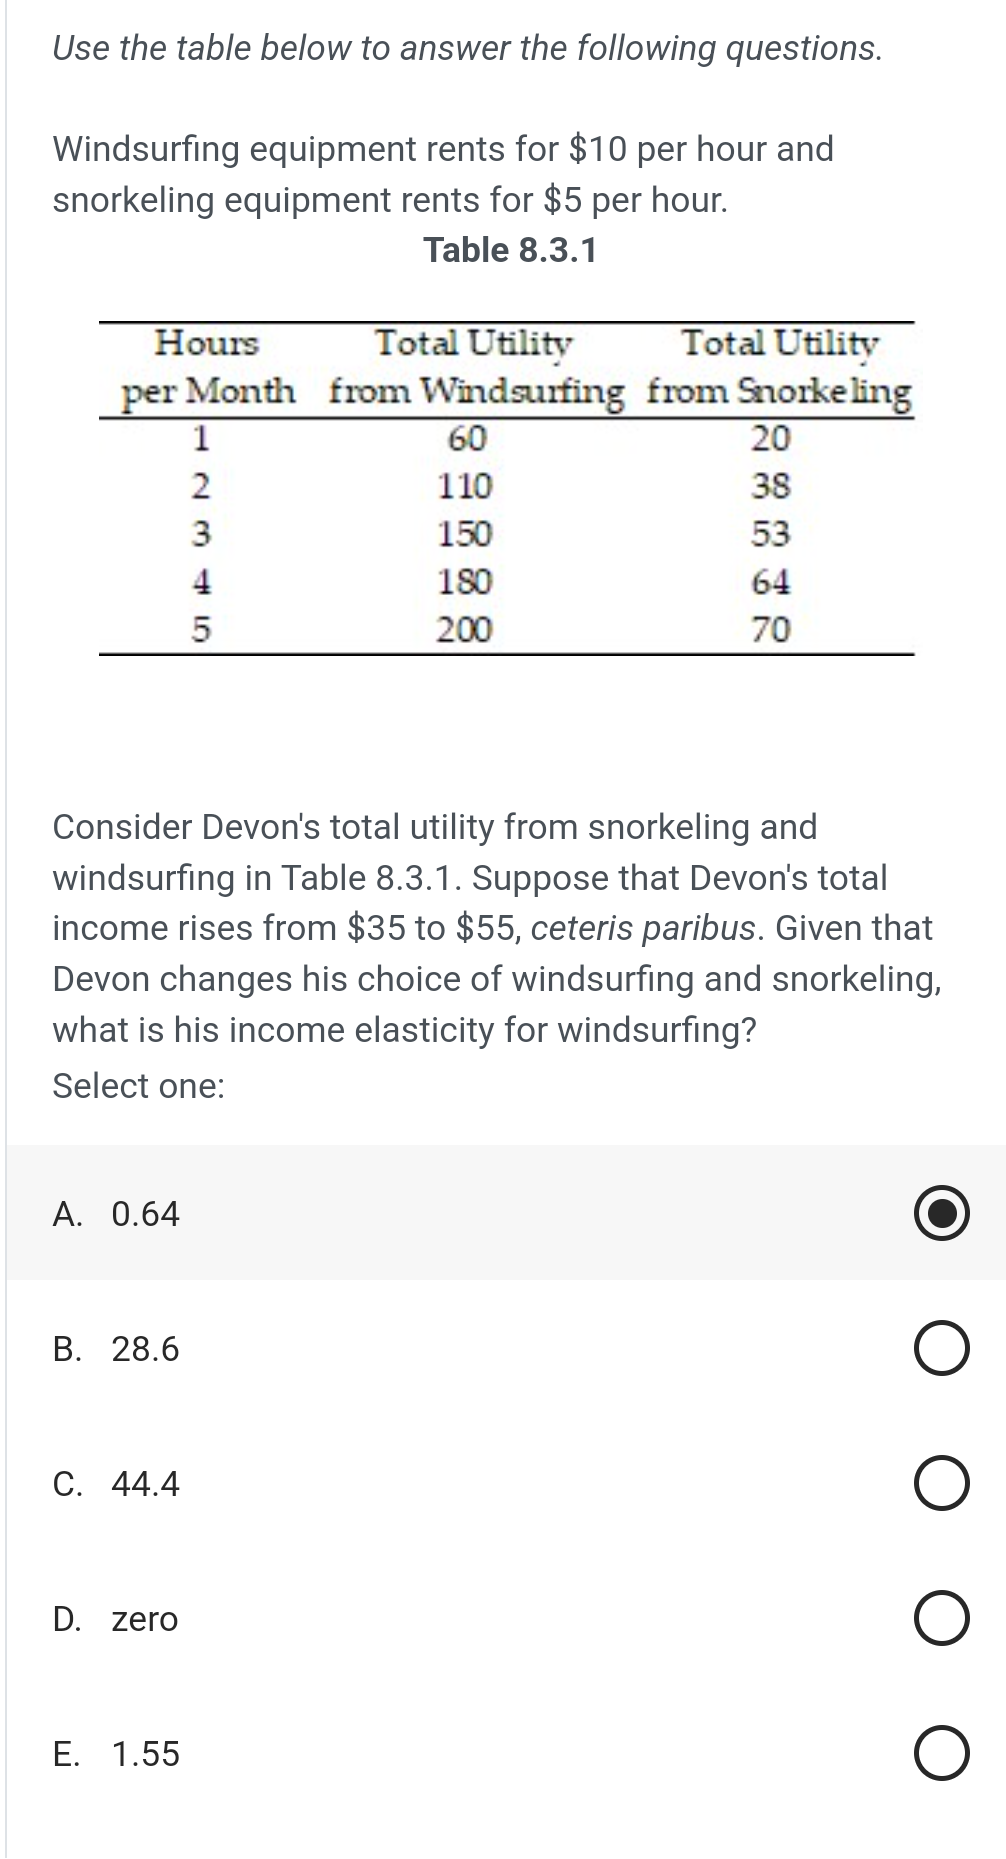 Use the table below to answer the following questions.
Windsurfing equipment rents for $10 per hour and
snorkeling equipment rents for $5 per hour.
Table 8.3.1
Hours
Total Utility
Total Utility
per Month from Windsurfing from Snorkeling
A. 0.64
B. 28.6
C. 44.4
D. zero
1
E. 1.55
23410
2
Consider Devon's total utility from snorkeling and
windsurfing in Table 8.3.1. Suppose that Devon's total
income rises from $35 to $55, ceteris paribus. Given that
Devon changes his choice of windsurfing and snorkeling,
what is his income elasticity for windsurfing?
Select one:
3
5
60
110
150
180
200
20
38
53
64
70
O